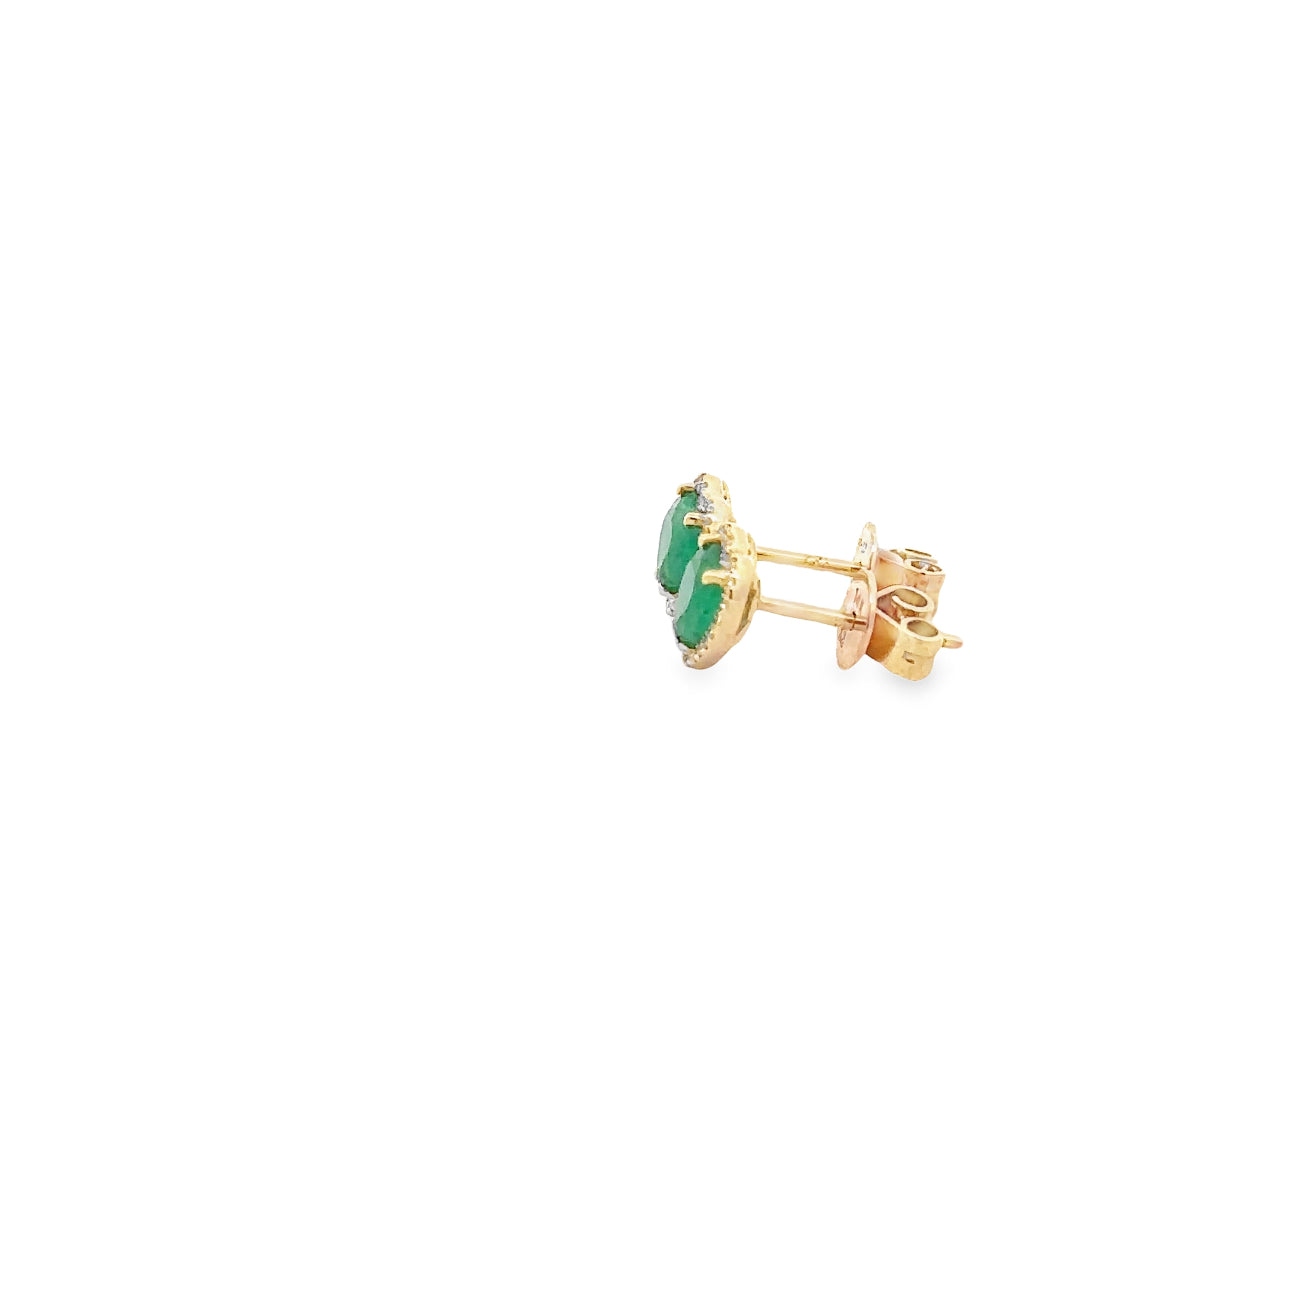 WD1317 14kt Gold Emerald Studs with Pave Diamond Halo